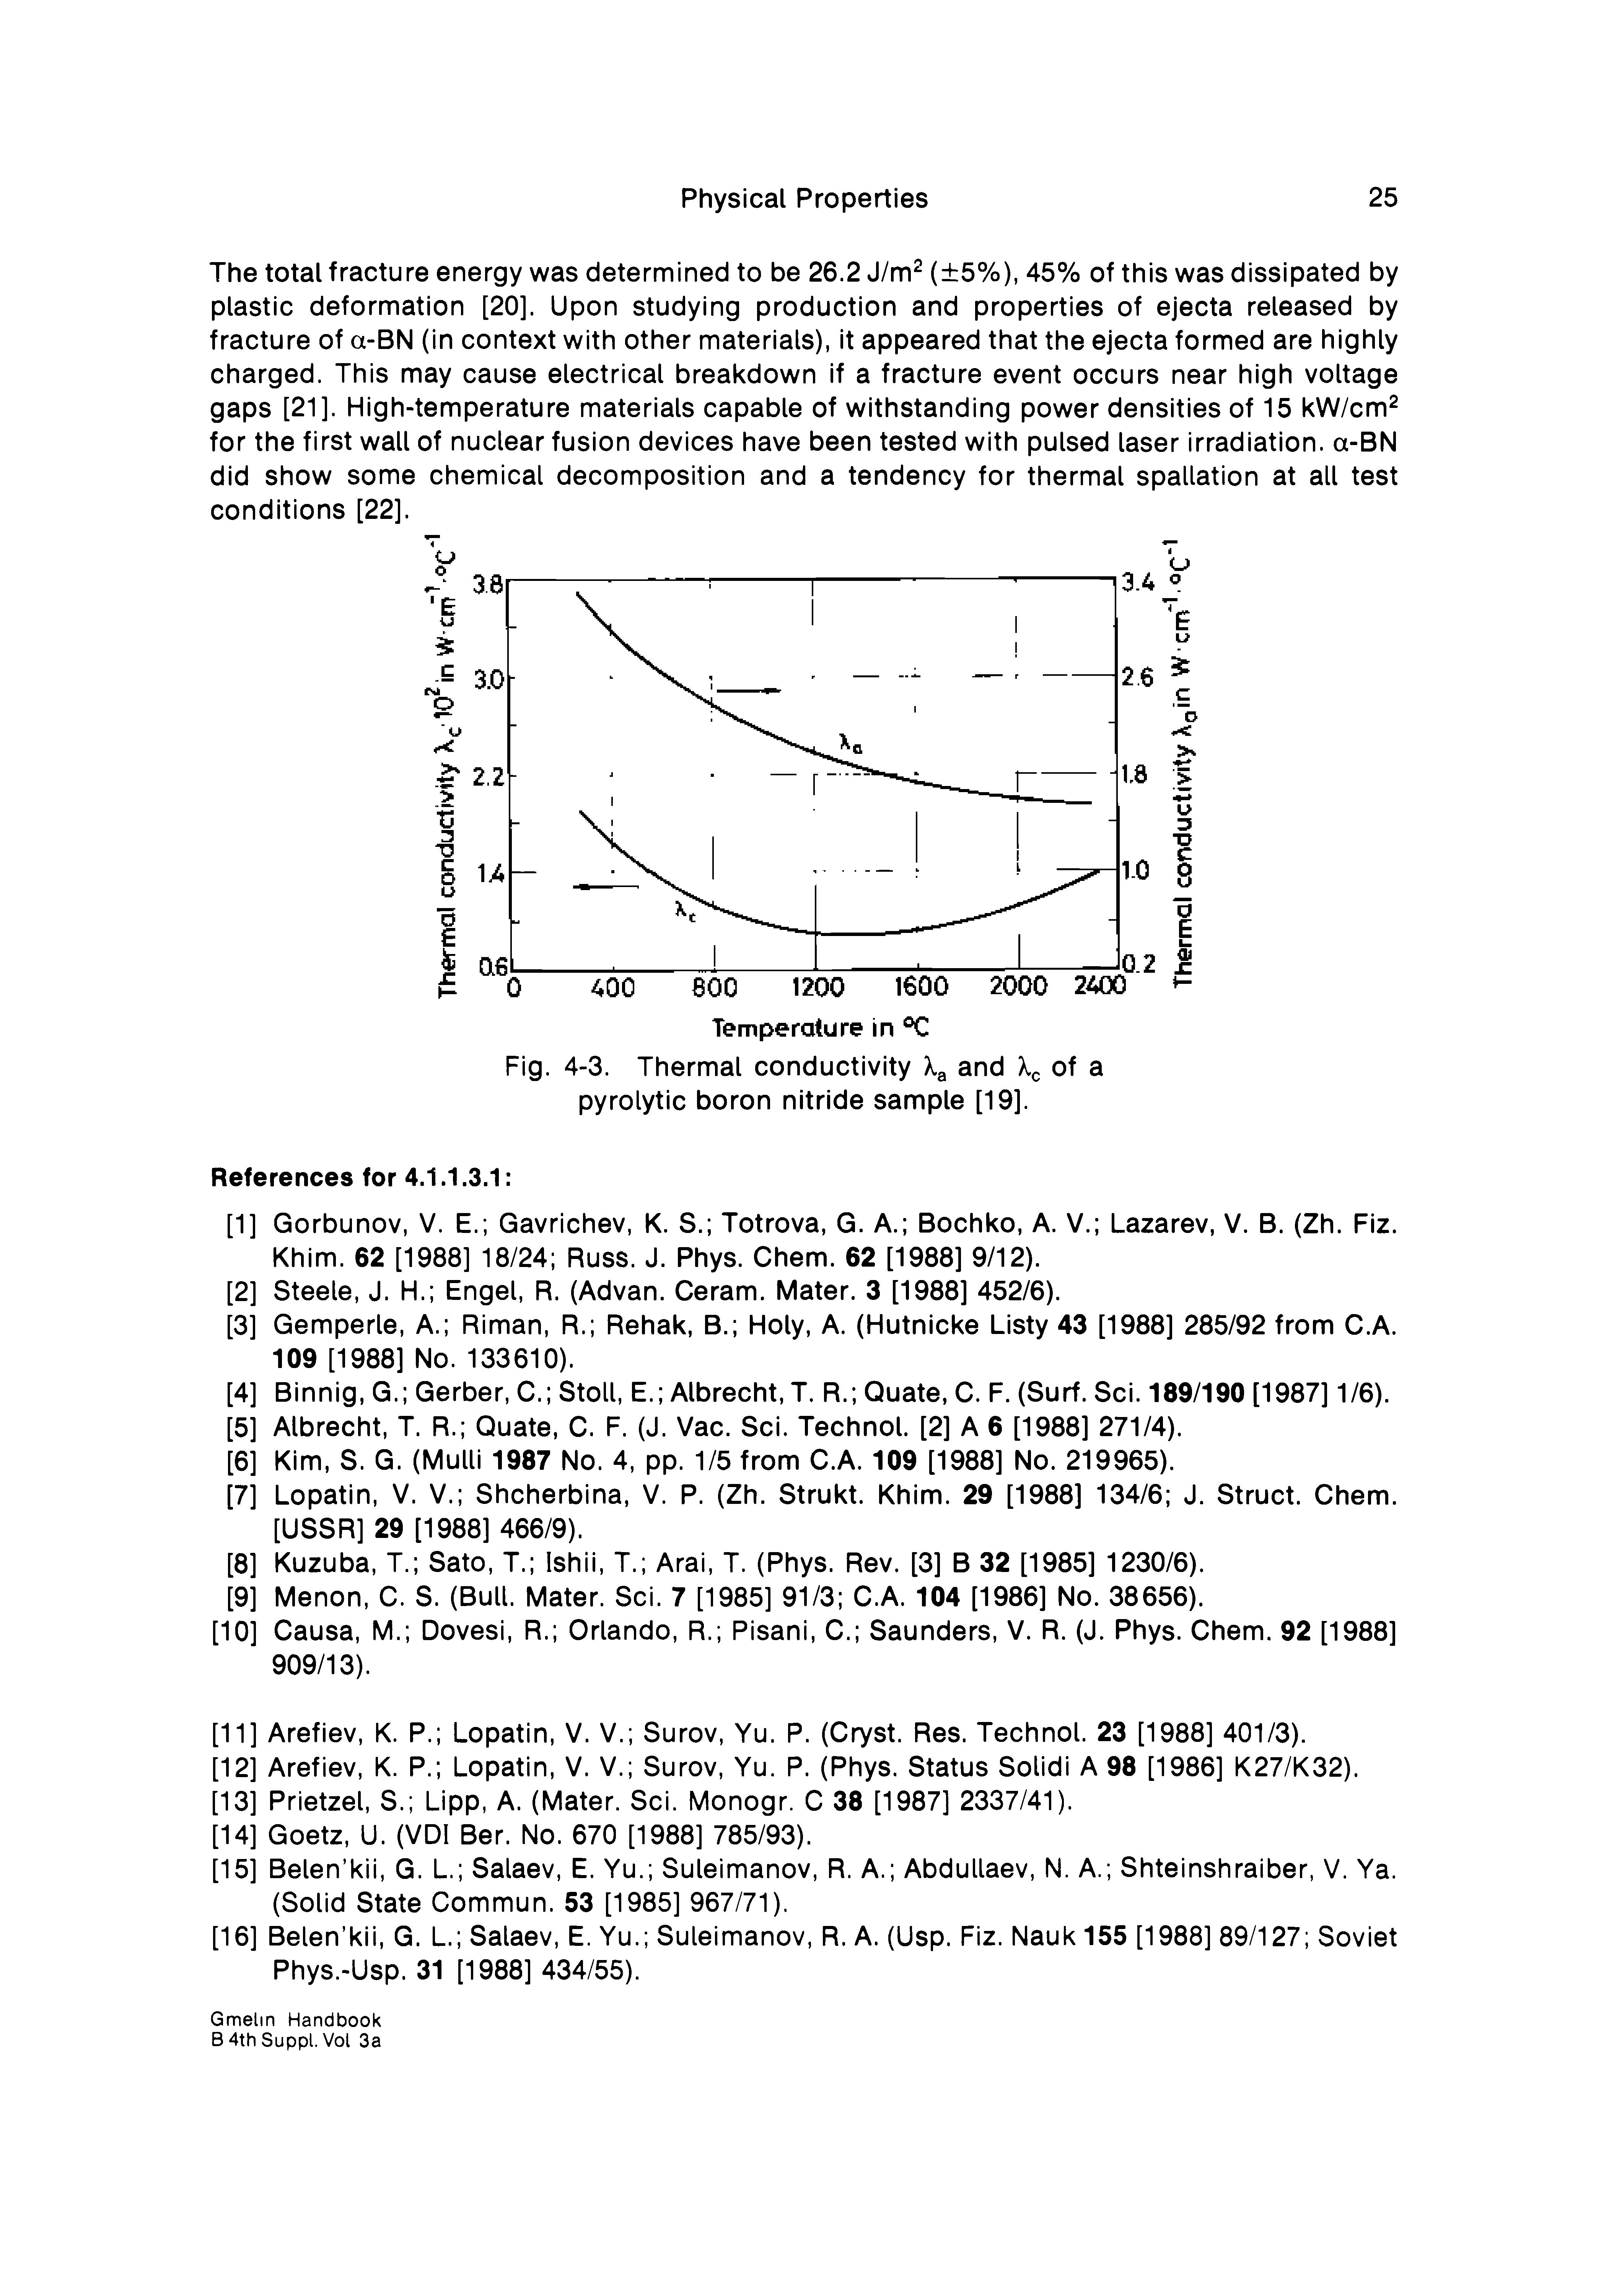 Fig. 4-3. Thermal conductivity and of a pyrolytic boron nitride sample [19].